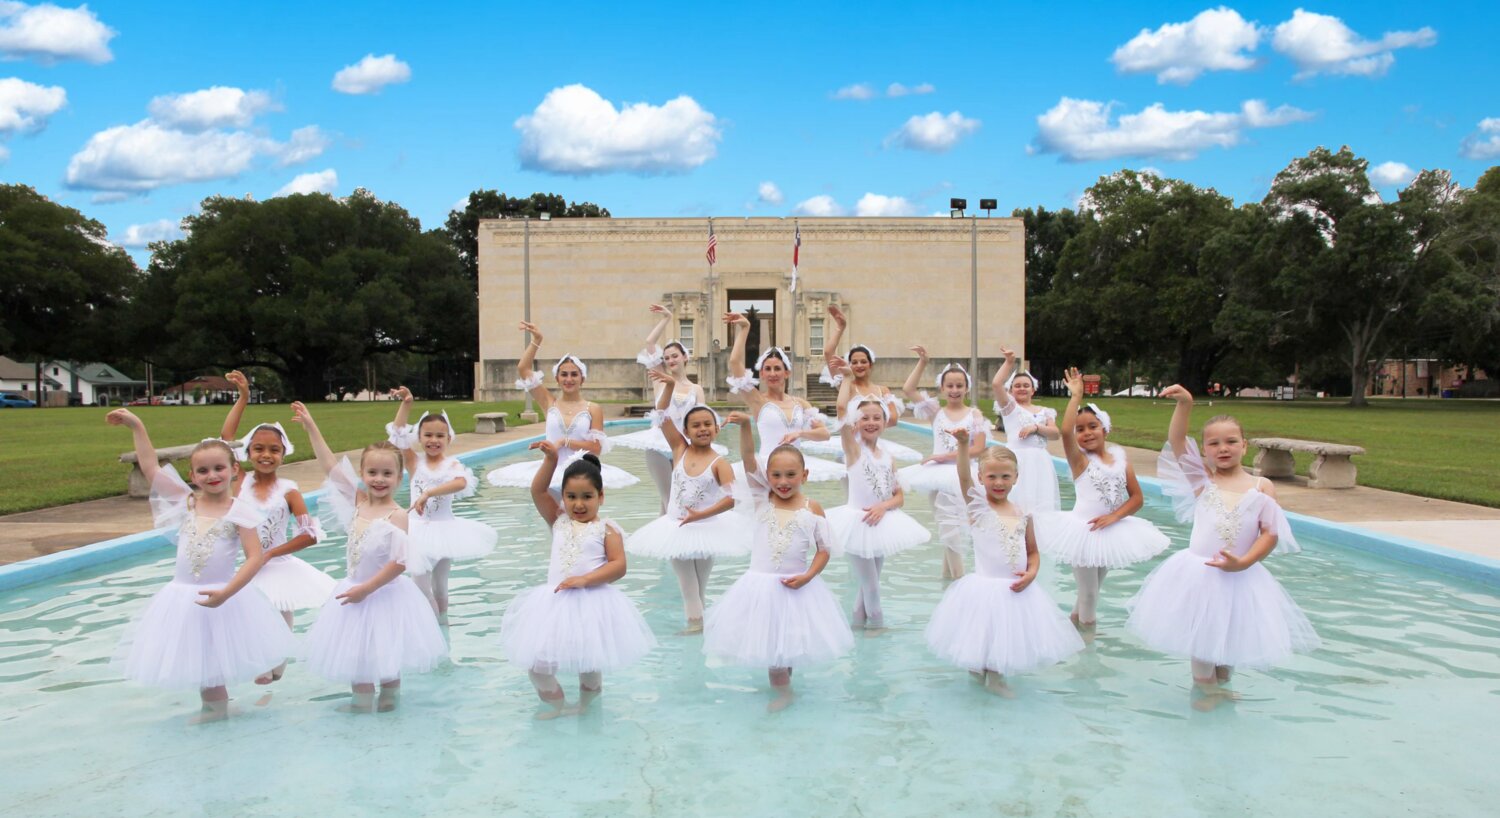 Seventeen swans a swimming! The beautiful Swan Lake swans have made a majestic stop at the reflection pool in front of Gonzales Memorial Museum, on their way to The Crystal Theatre! Don't miss the chance to experience the enchanting tale of "Swan Lake" live on June 8-9. Tickets are available at comeandtakeitdance.com.